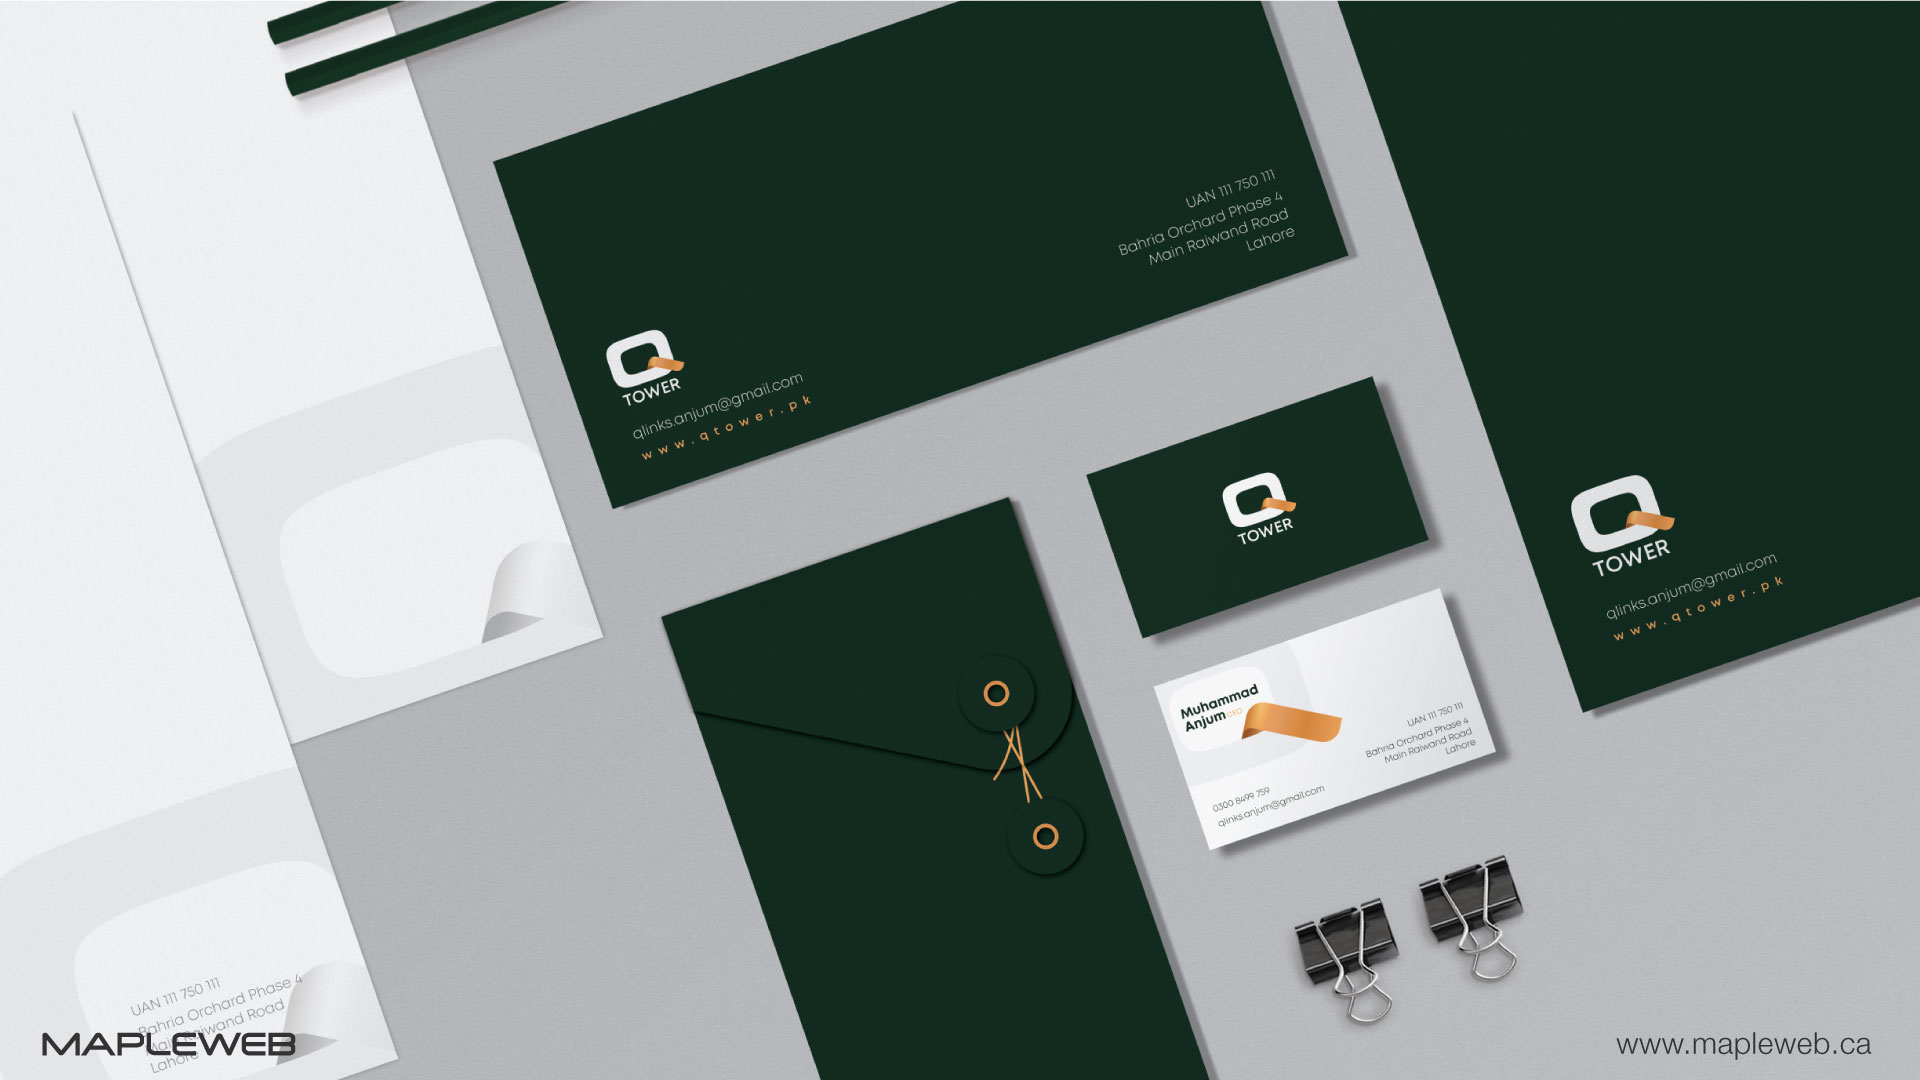 q-tower-brand-logo-design-by-mapleweb-vancouver-canada-green-stationery-mock